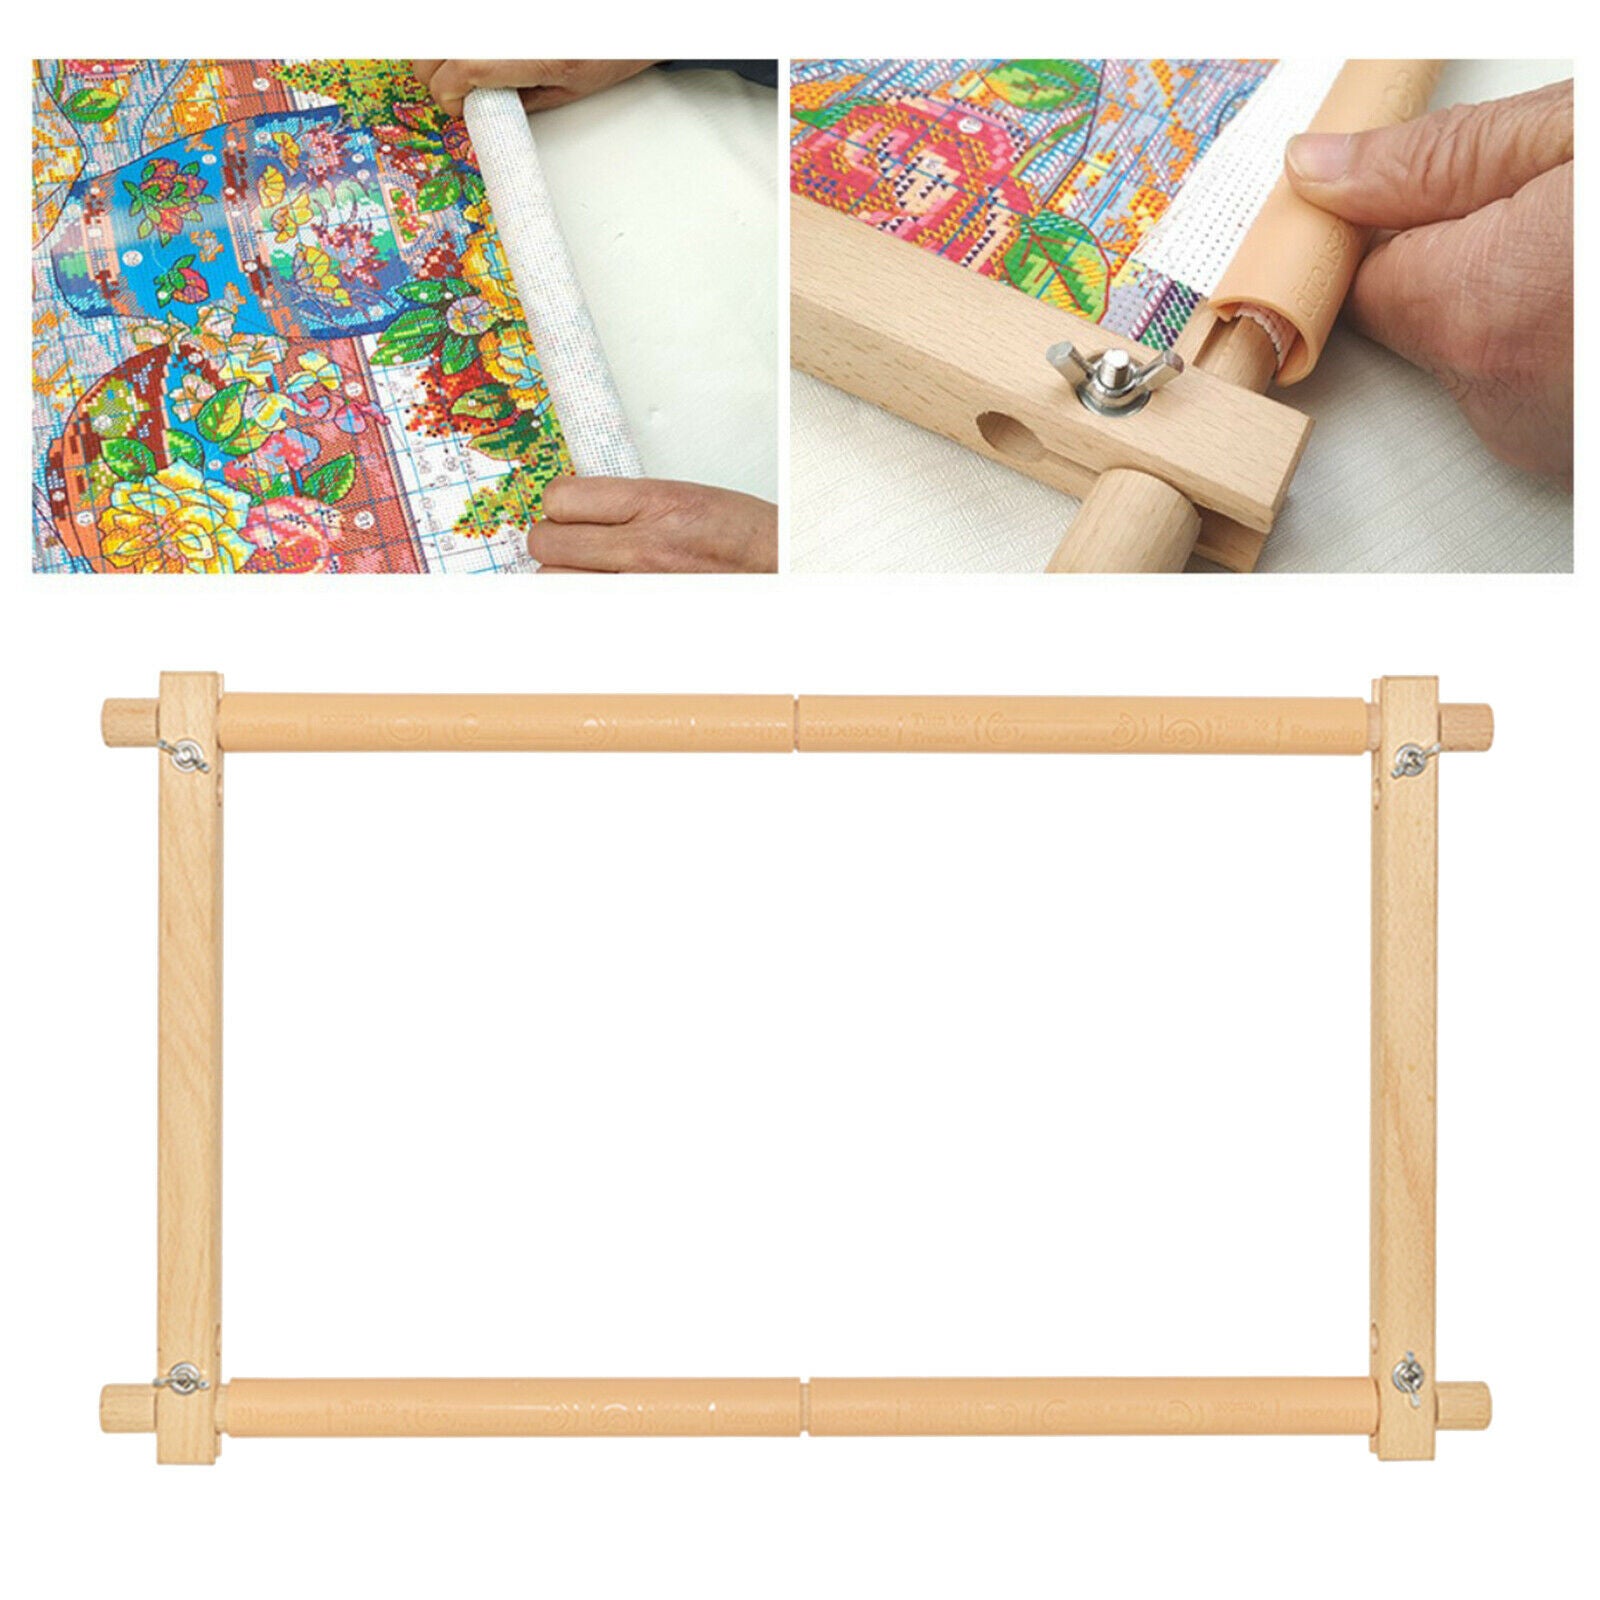 Portable Tapestry Scroll Embroidery Frame Cross Stitch DIY Sewing Hoop